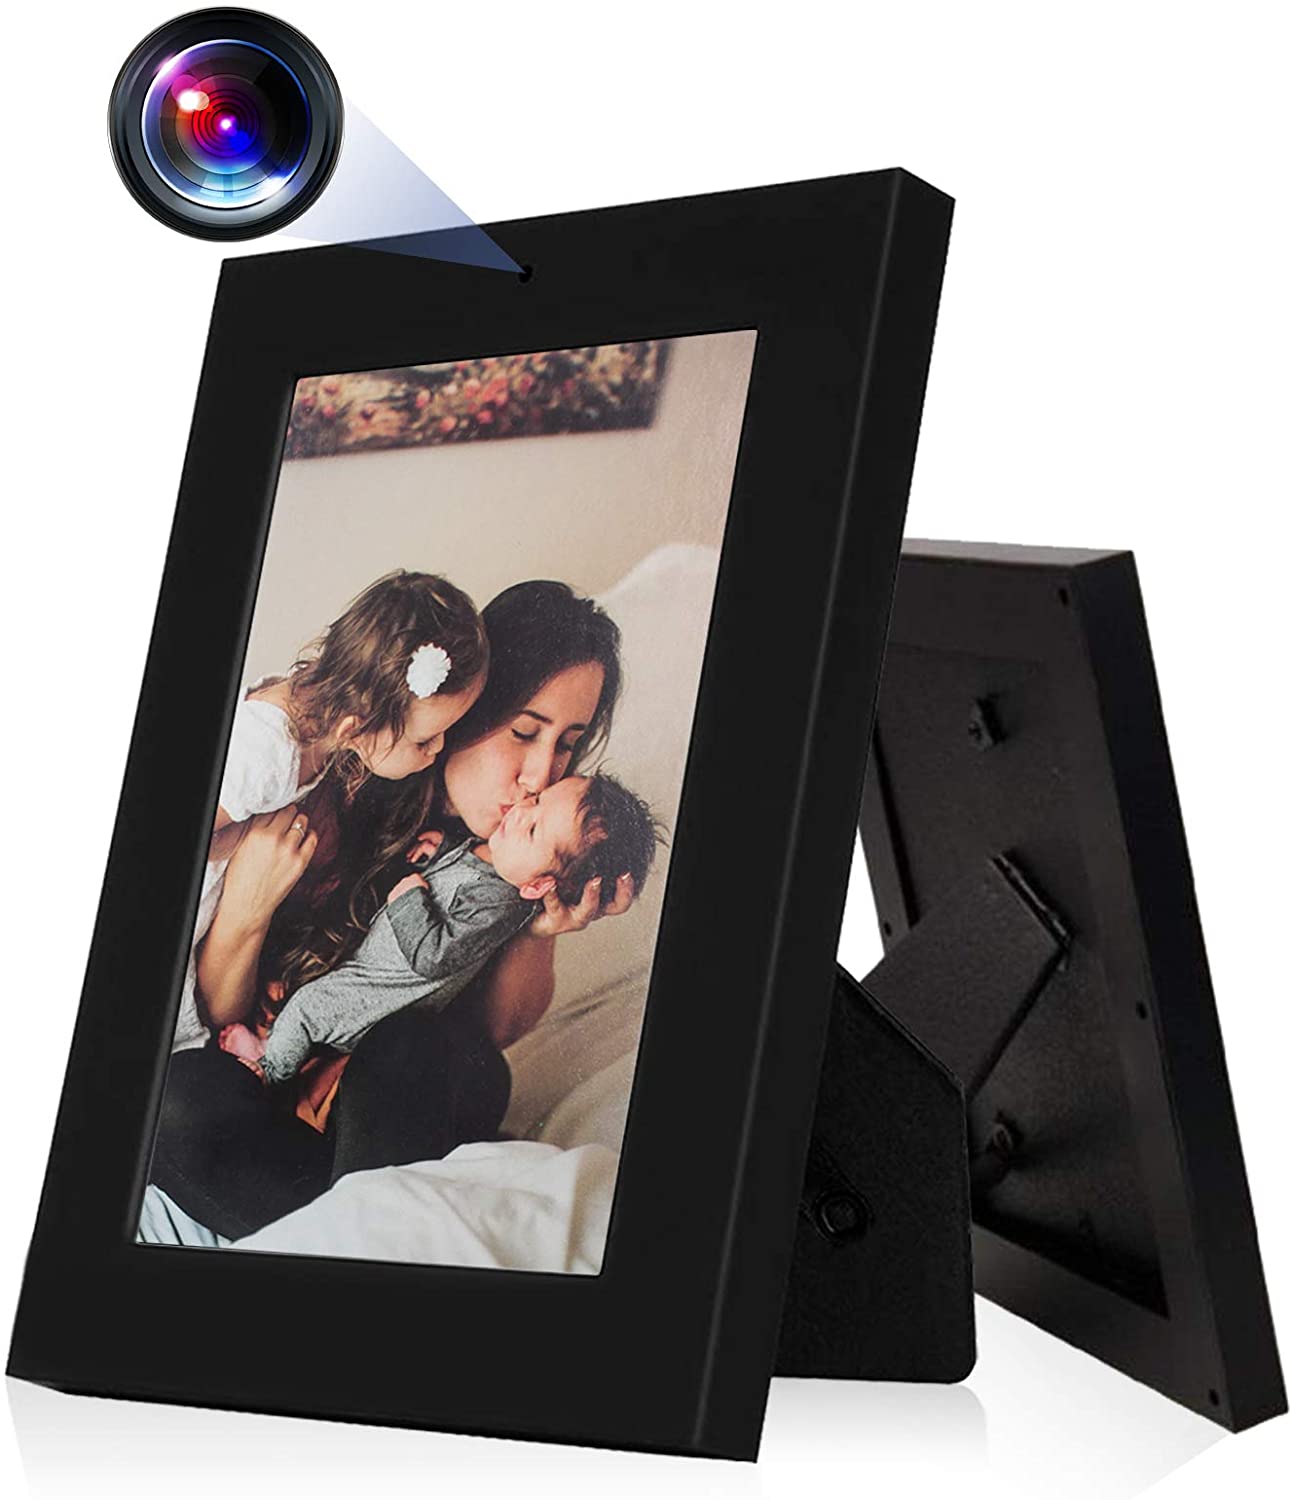 SAFETYNET Photo Frame Spy Camcorder With Motion detection Take Photo 1280 X 960